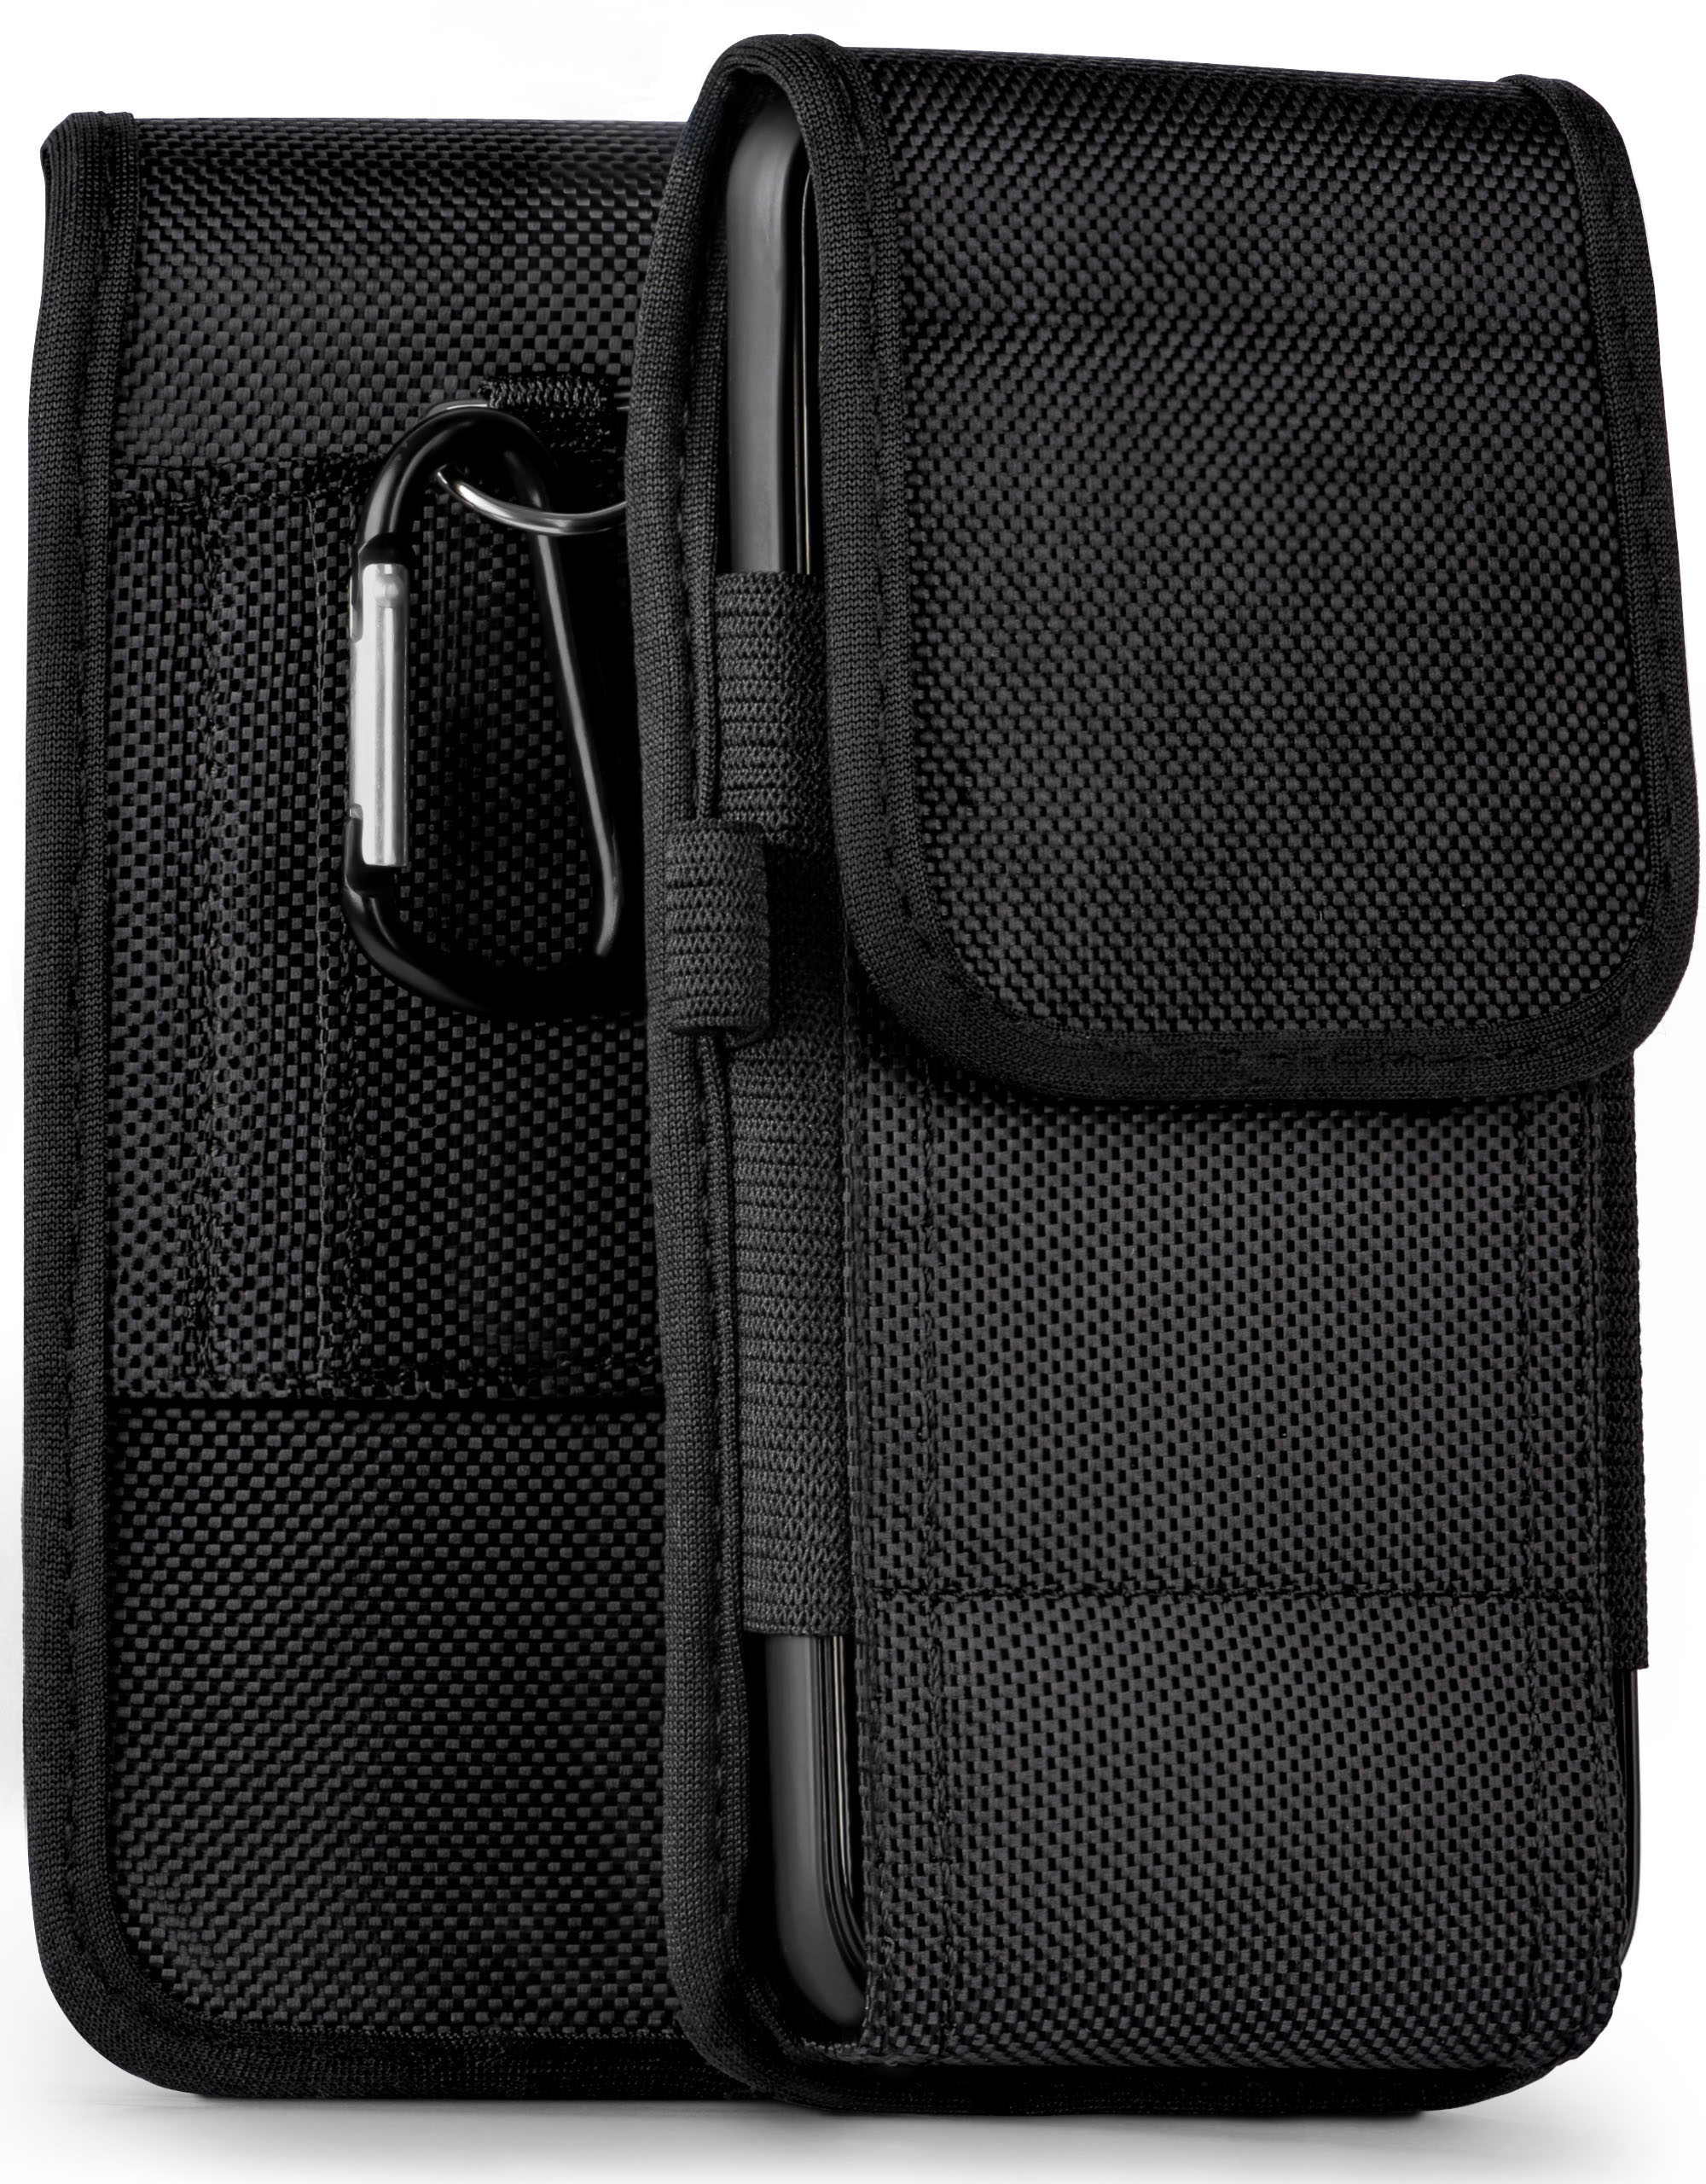 Case, Trail Go, MOEX Holster, Wiko, Agility View2